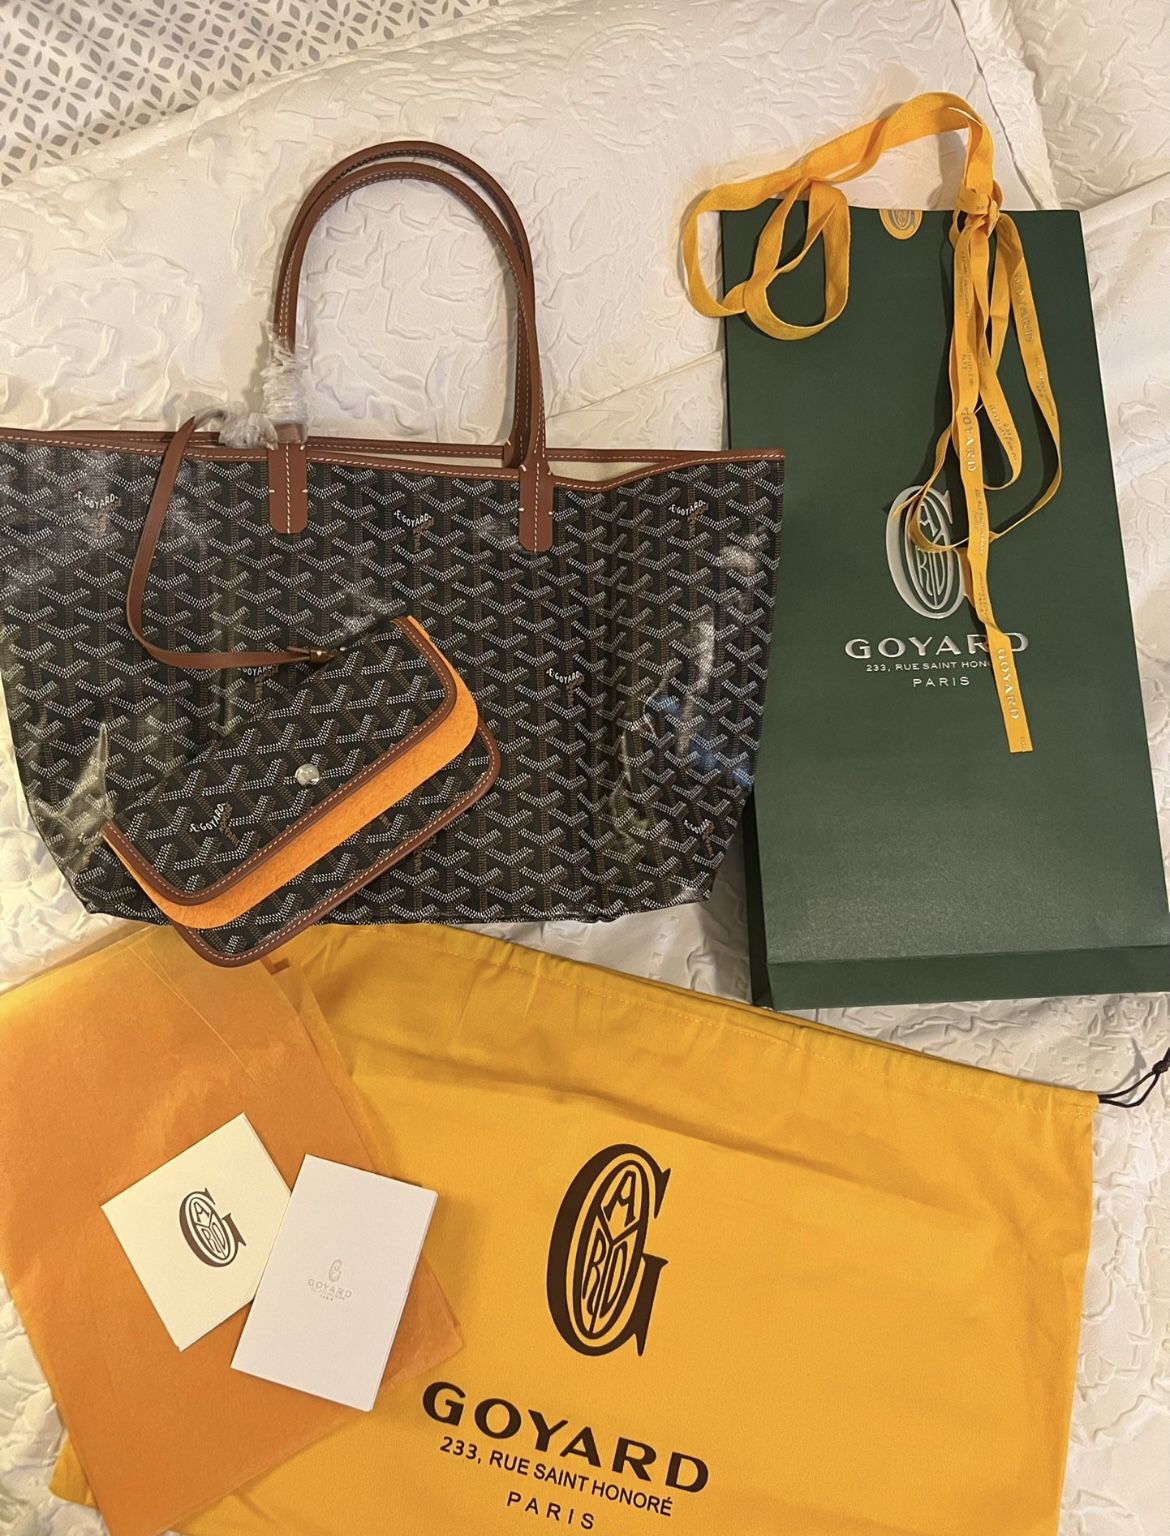 Goyard St. Louis PM Tote Bag for Sale in North Las Vegas, NV - OfferUp